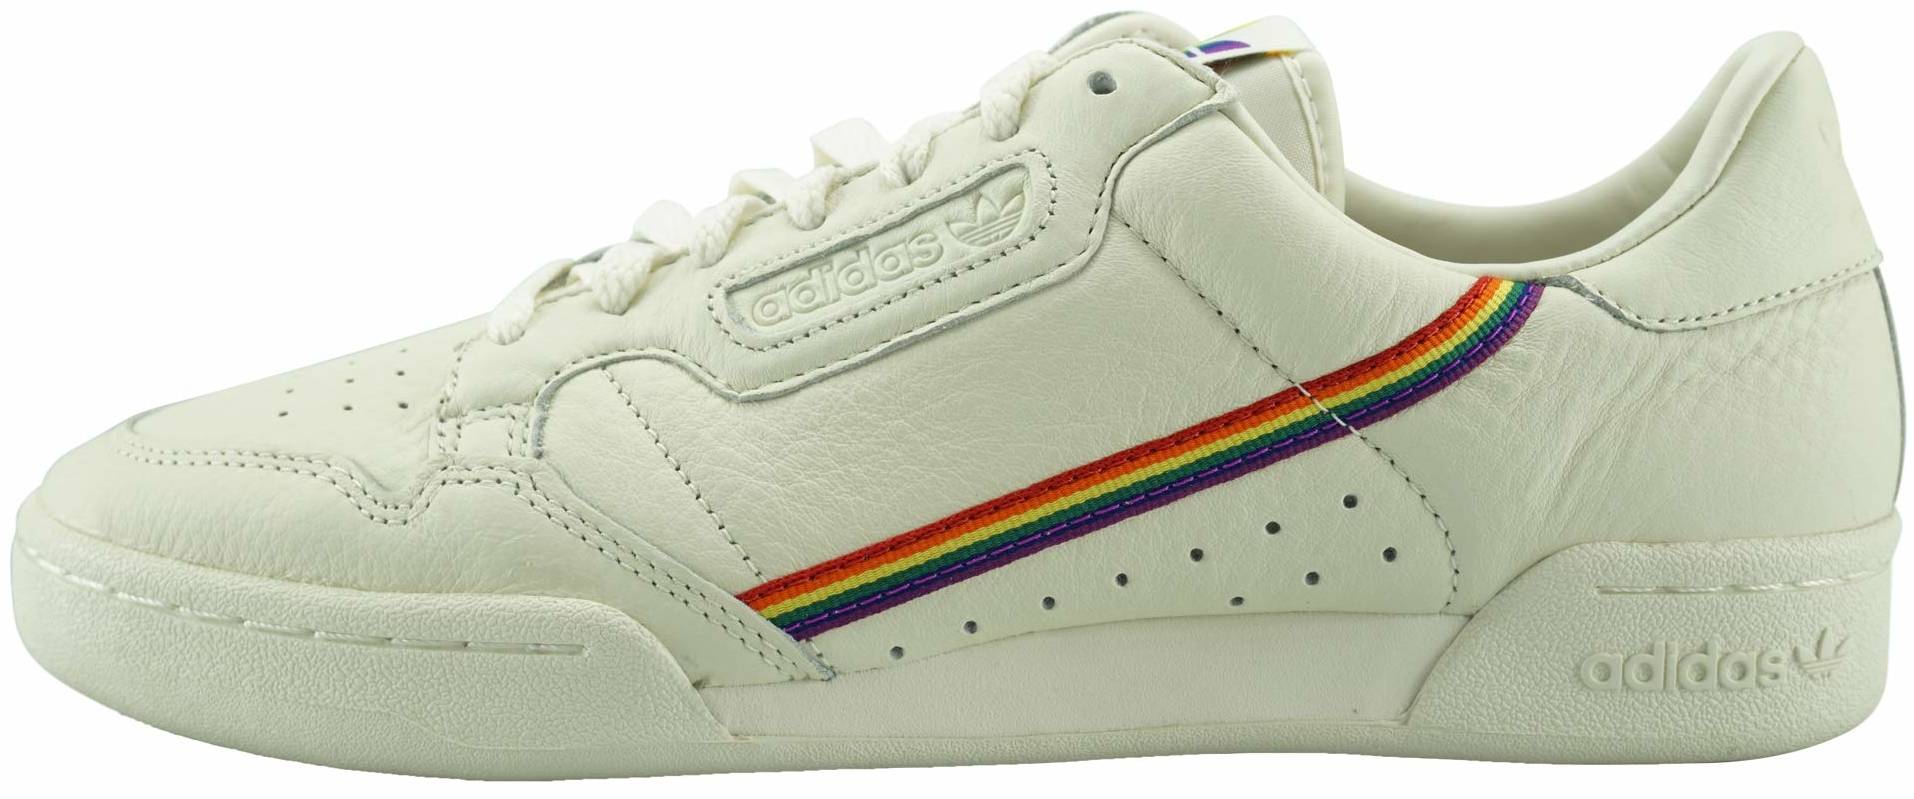 zoom react Grudge Adidas Continental 80 Pride sneakers in white | RunRepeat